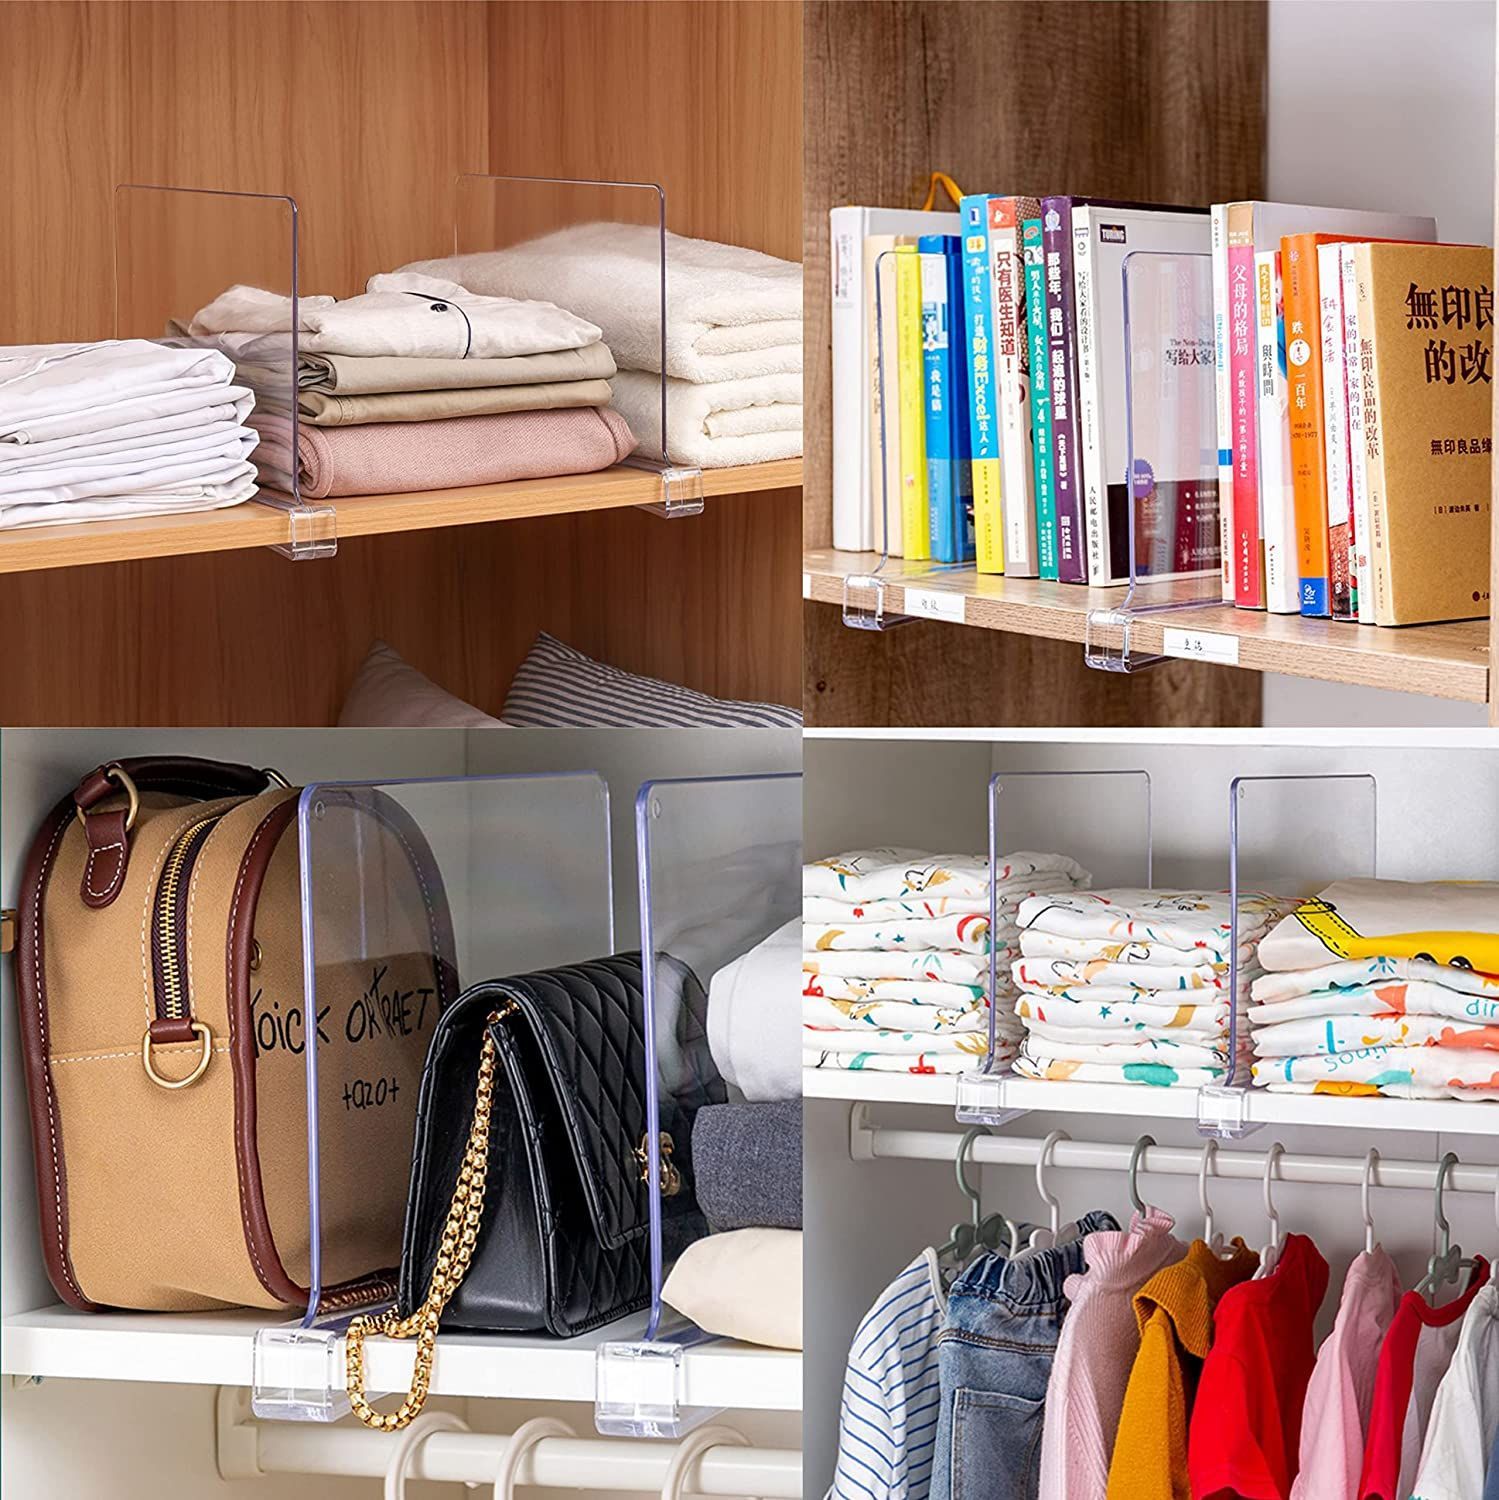 35 Best Closet Organization Ideas To Maximize Space With Regard To Wardrobe With Shelves (View 7 of 15)